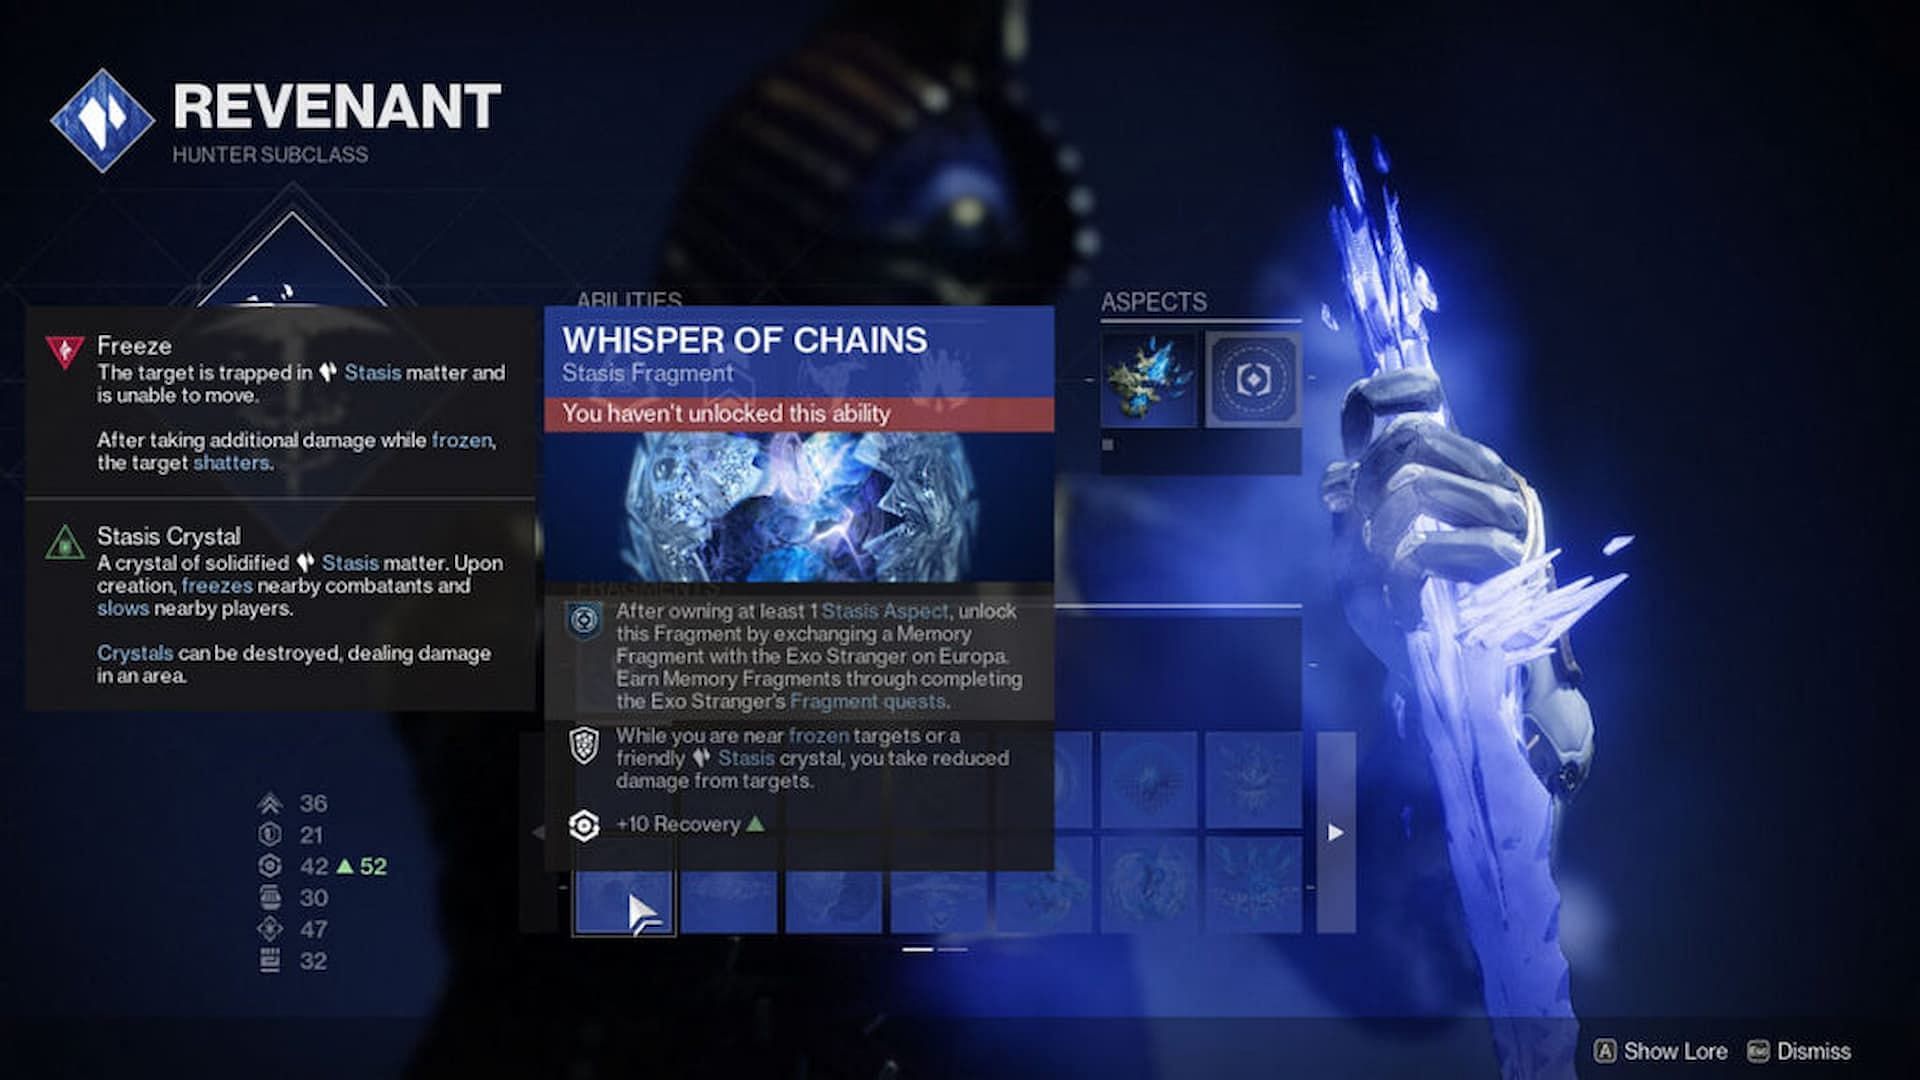 The Whisper of Chains is a great stasis fragment for Titans (Image via Bungie)